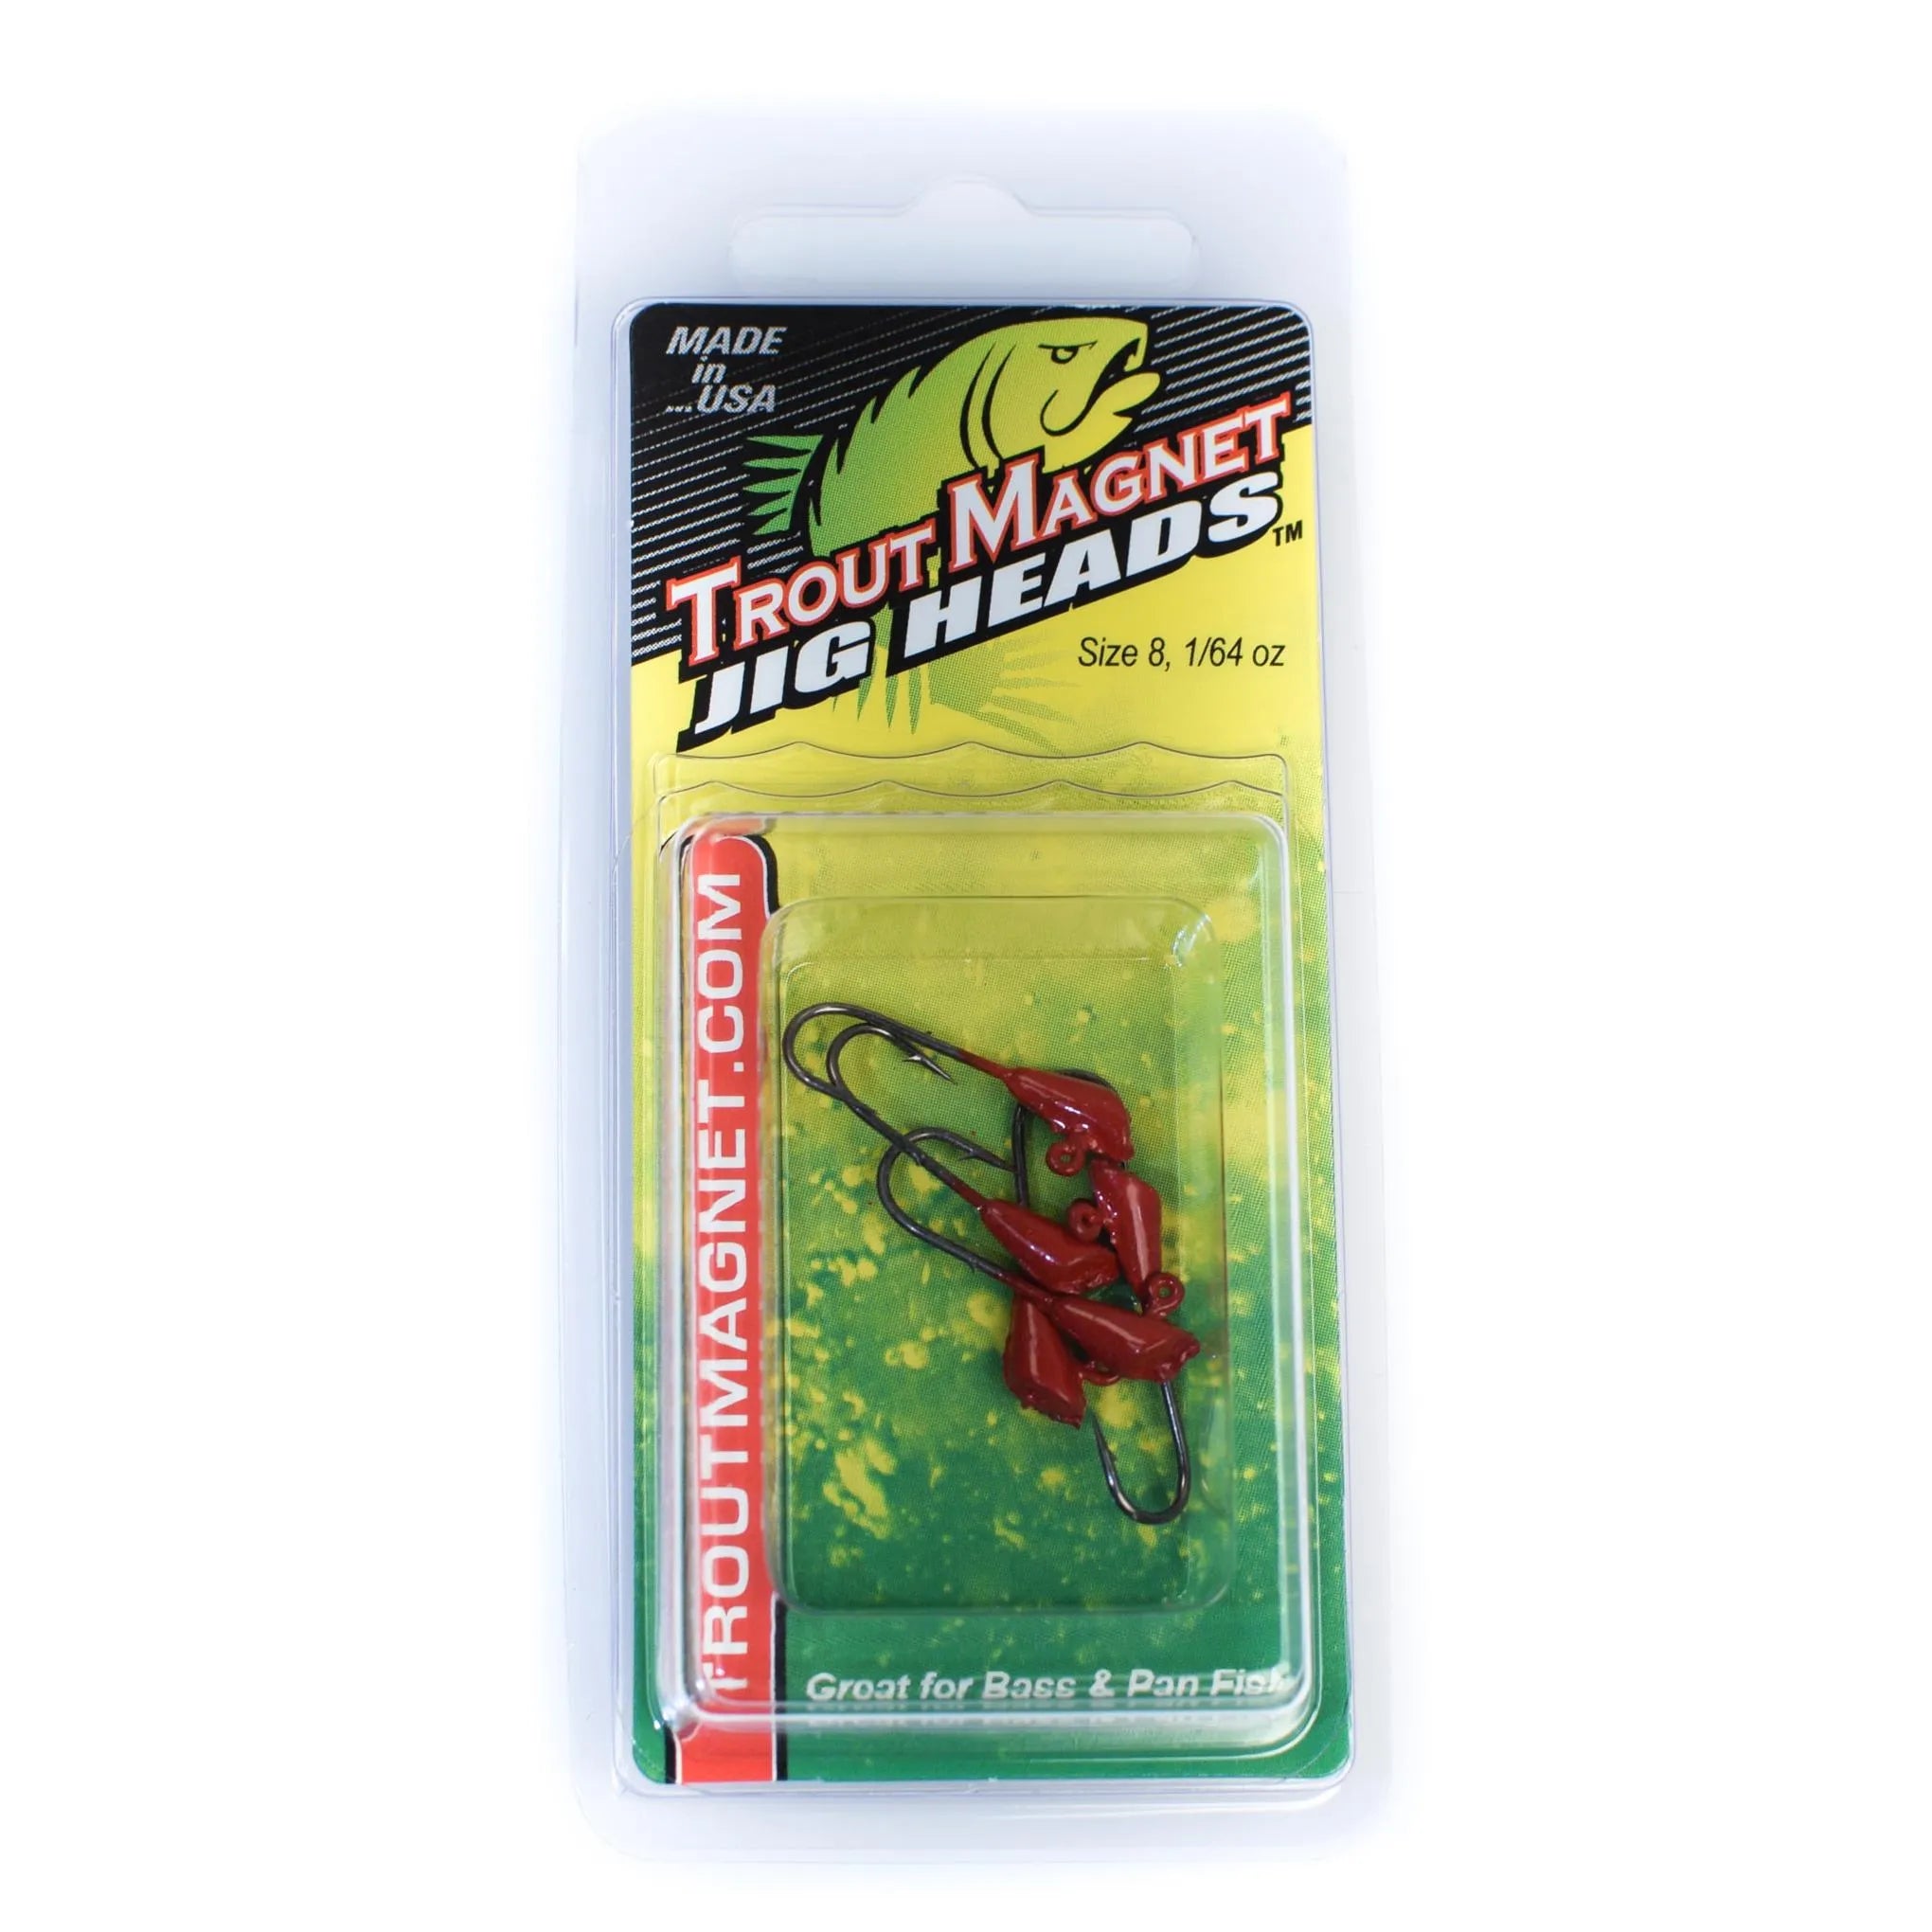 Trout Magnet Leland's Lures Jig Heads, 1/4 oz, with Extra Long